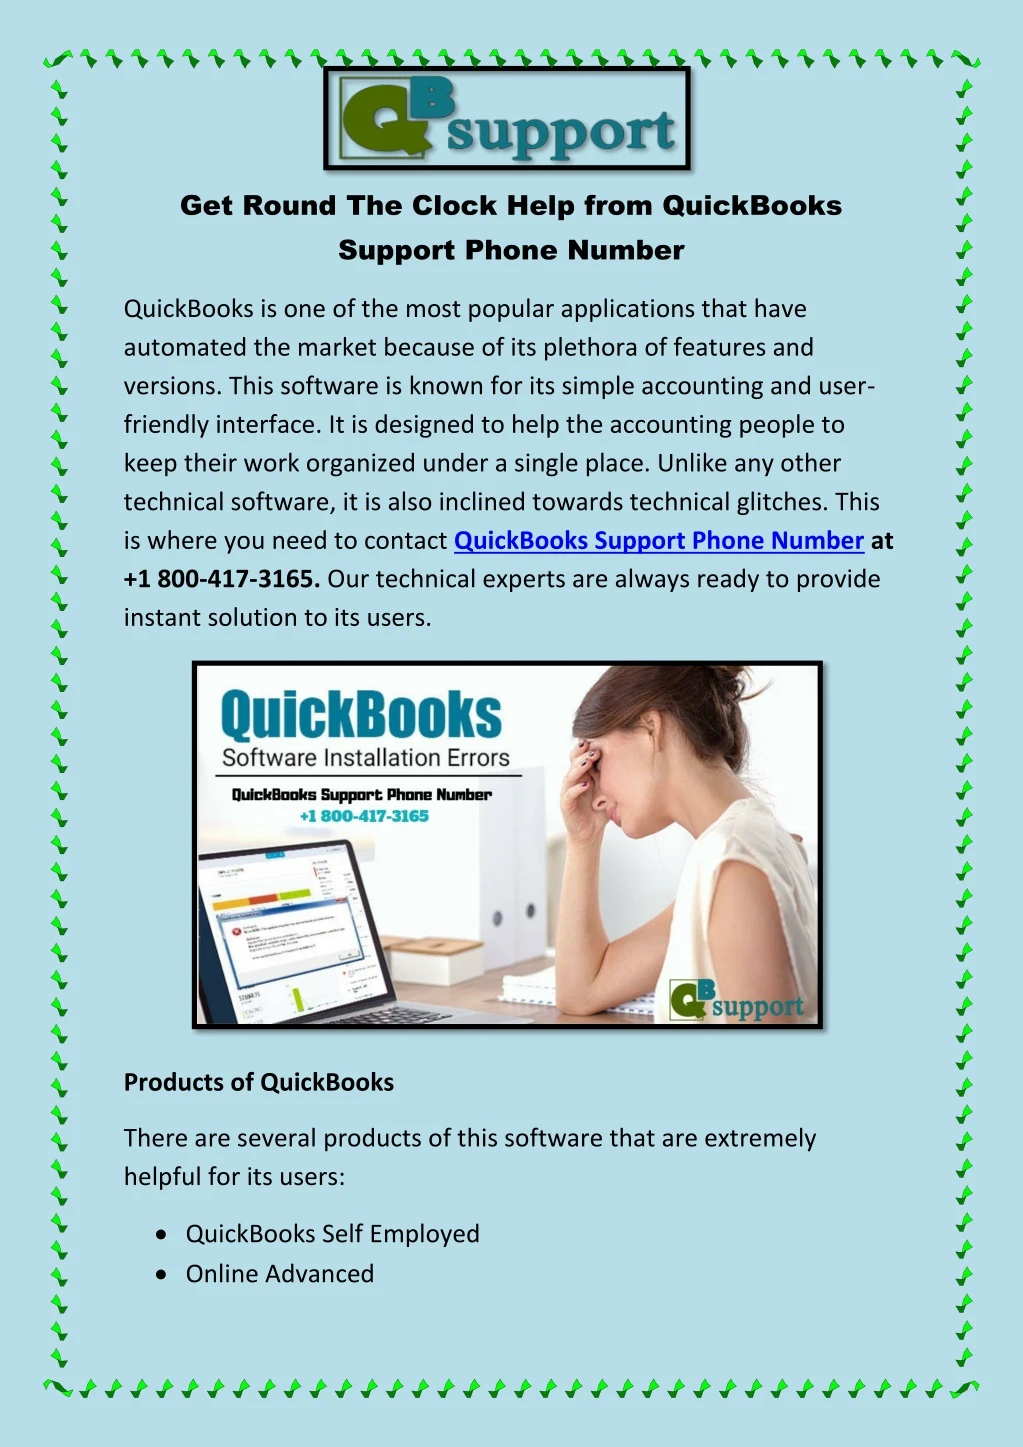 get round the clock help from quickbooks support